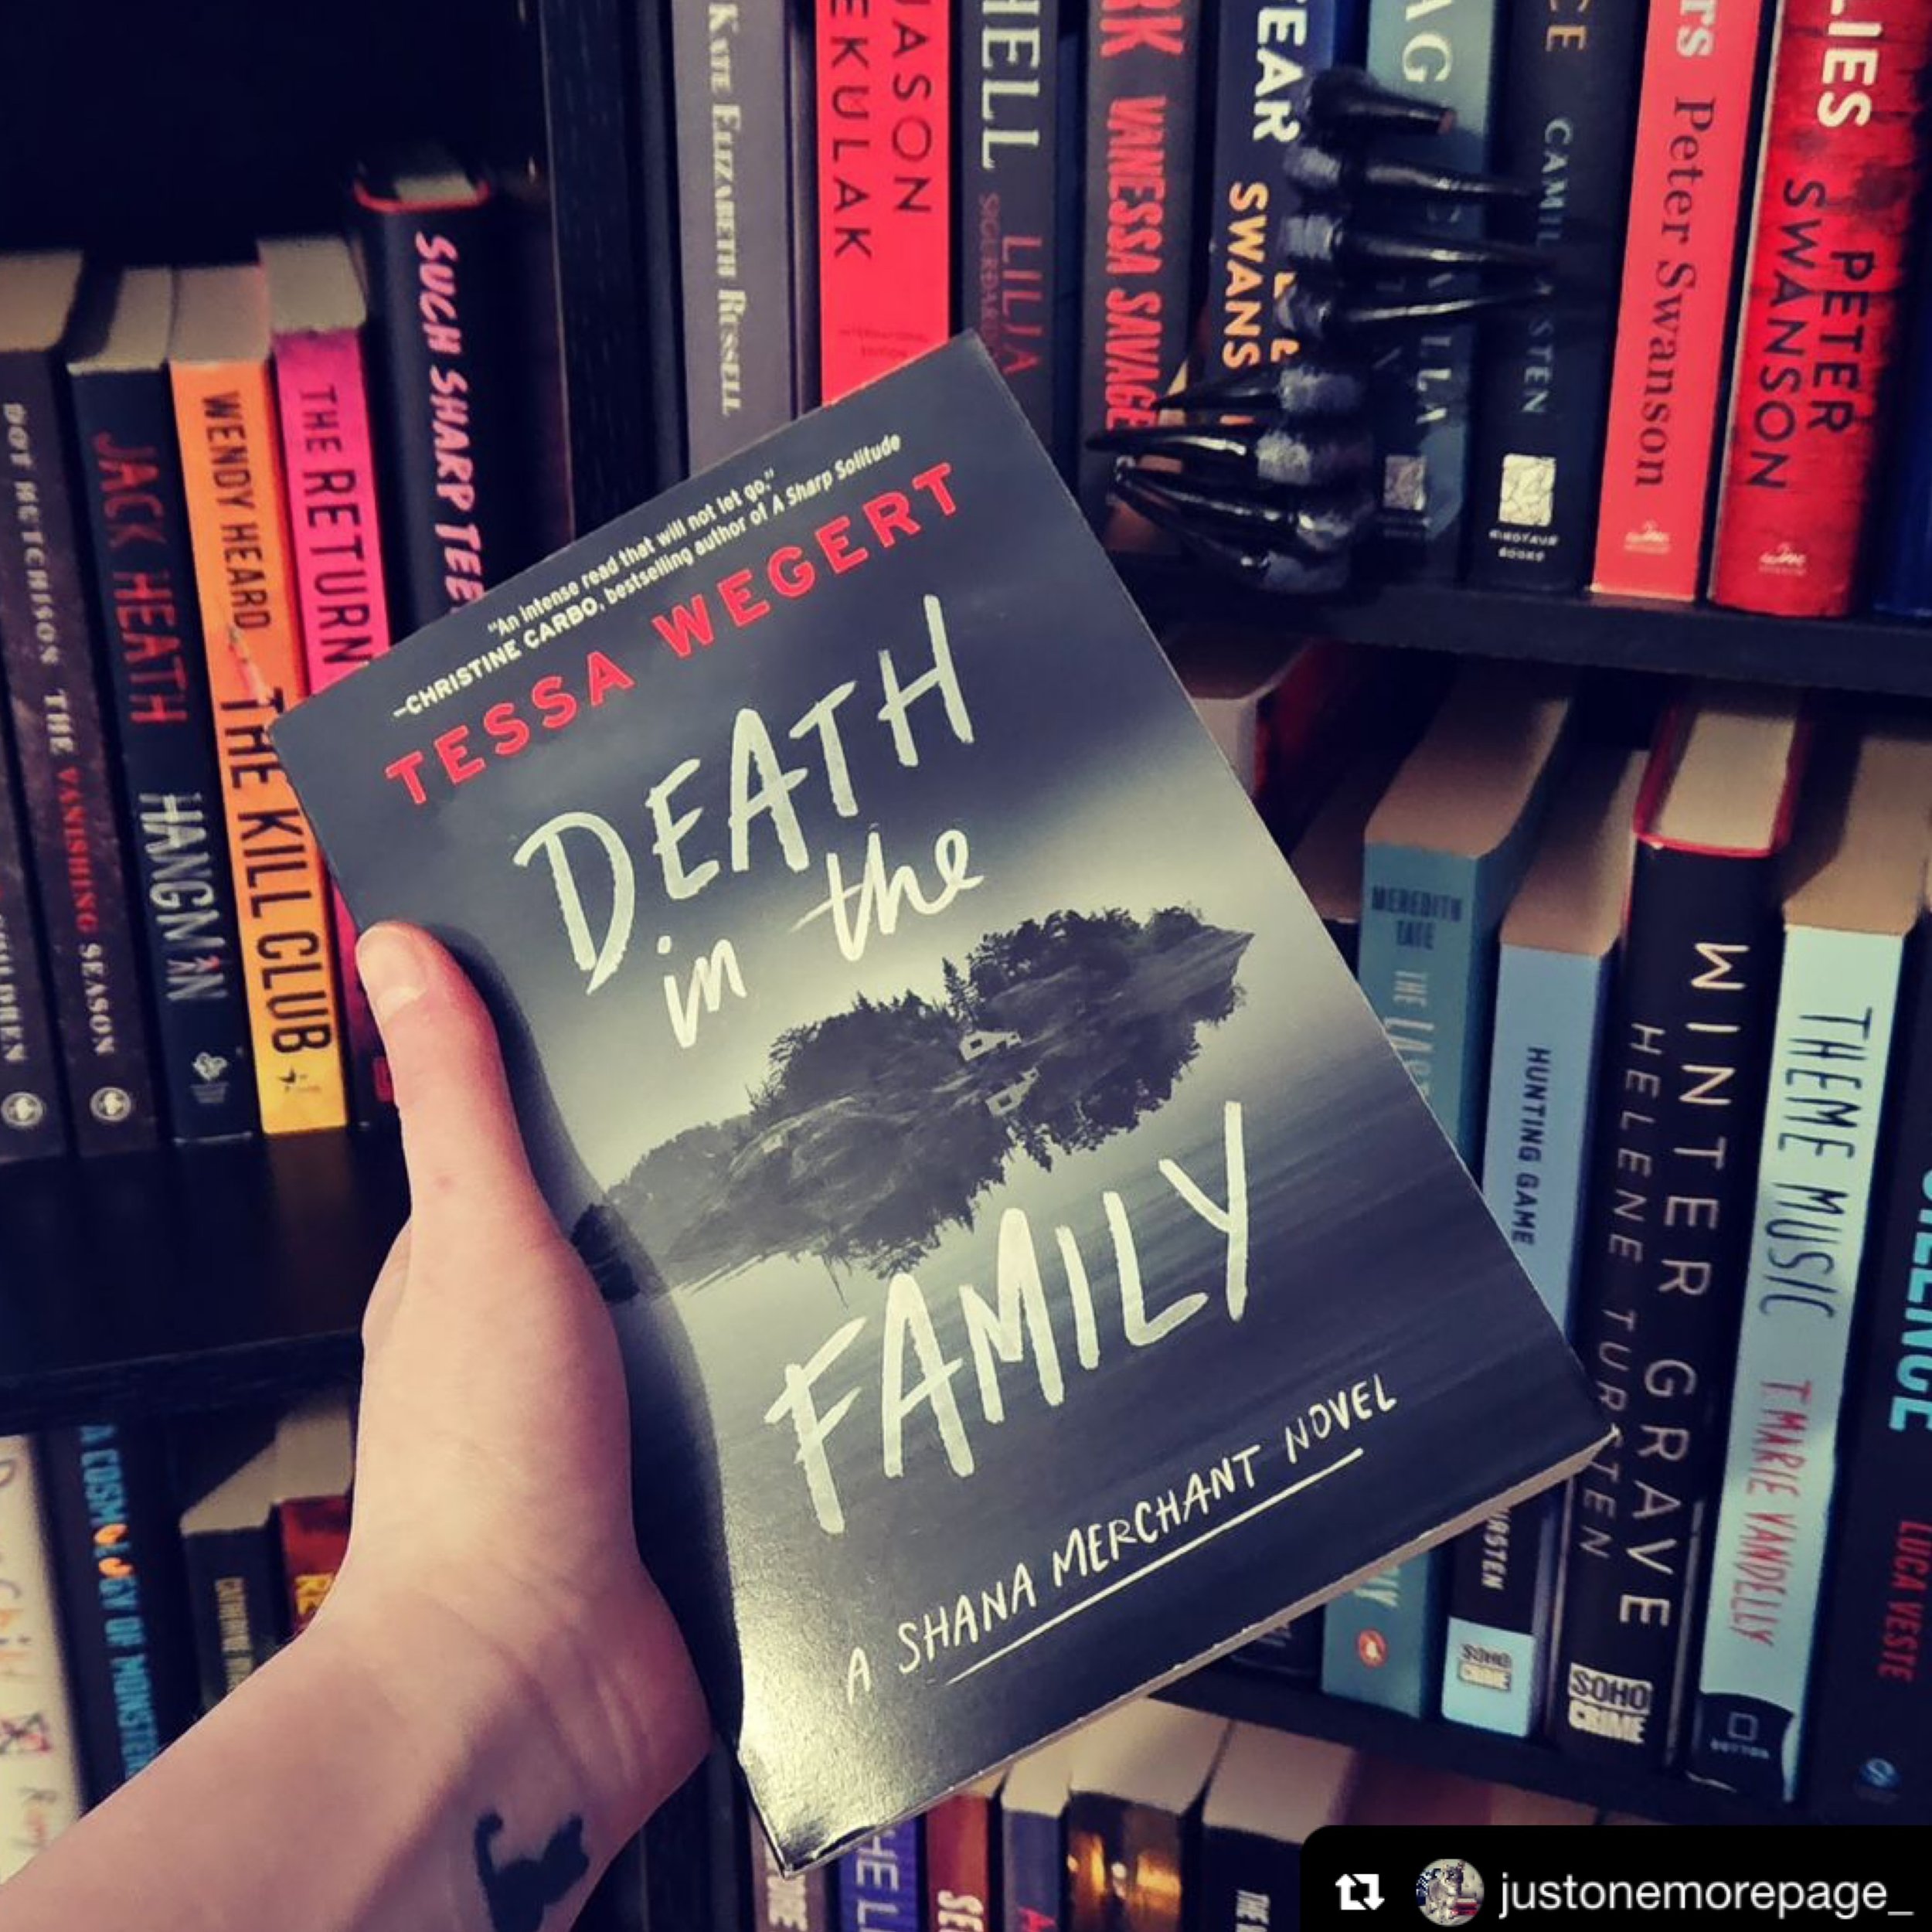 &ldquo;Blood ties can be bloody.&rdquo; 💀

It&rsquo;s been four years since DEATH IN THE FAMILY was published, and seeing readers continue to discover it&mdash;and Shana Merchant&mdash;brings me so much joy. Thank you for braving a weekend on Tern I